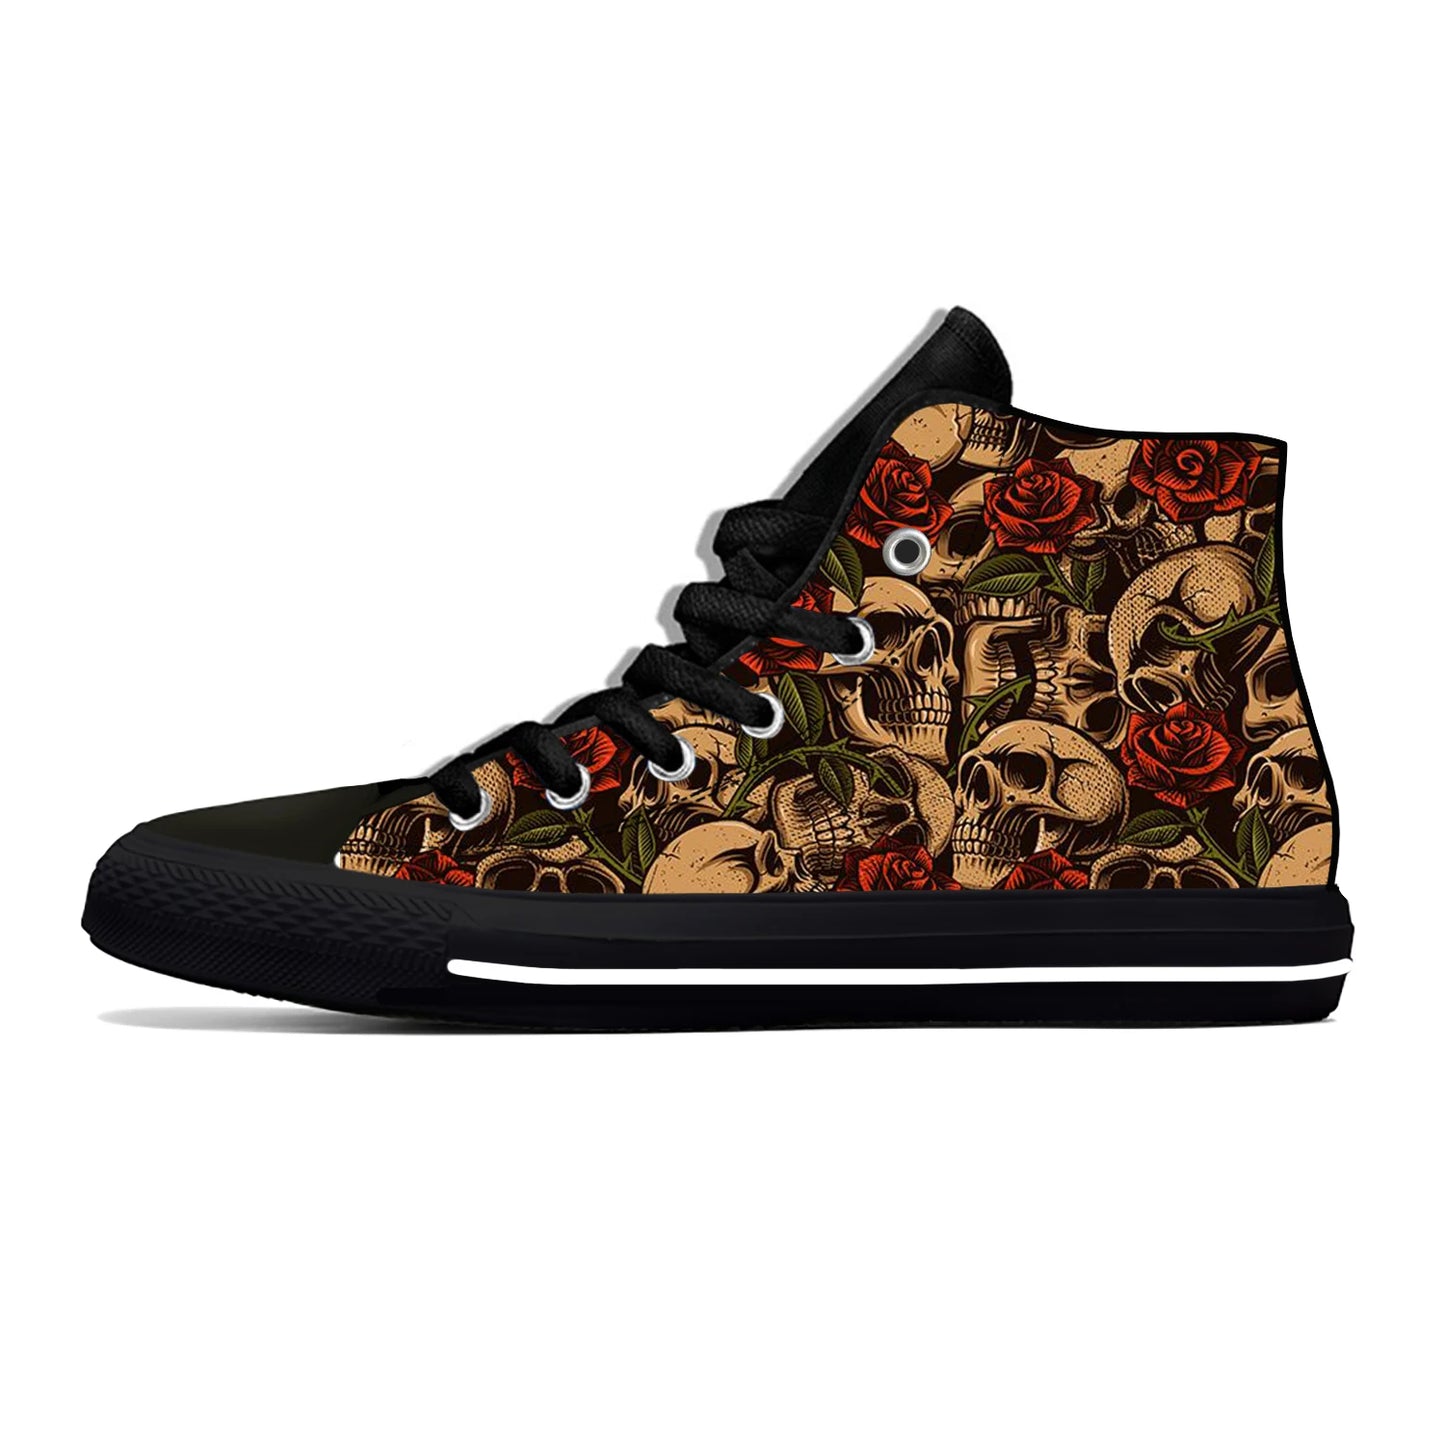 Hot SKull PAisley Gothic Goth Horror Punk Scary Cool High Top Breathable Men Women Summer Sneakers Lightweight Casual Shoes